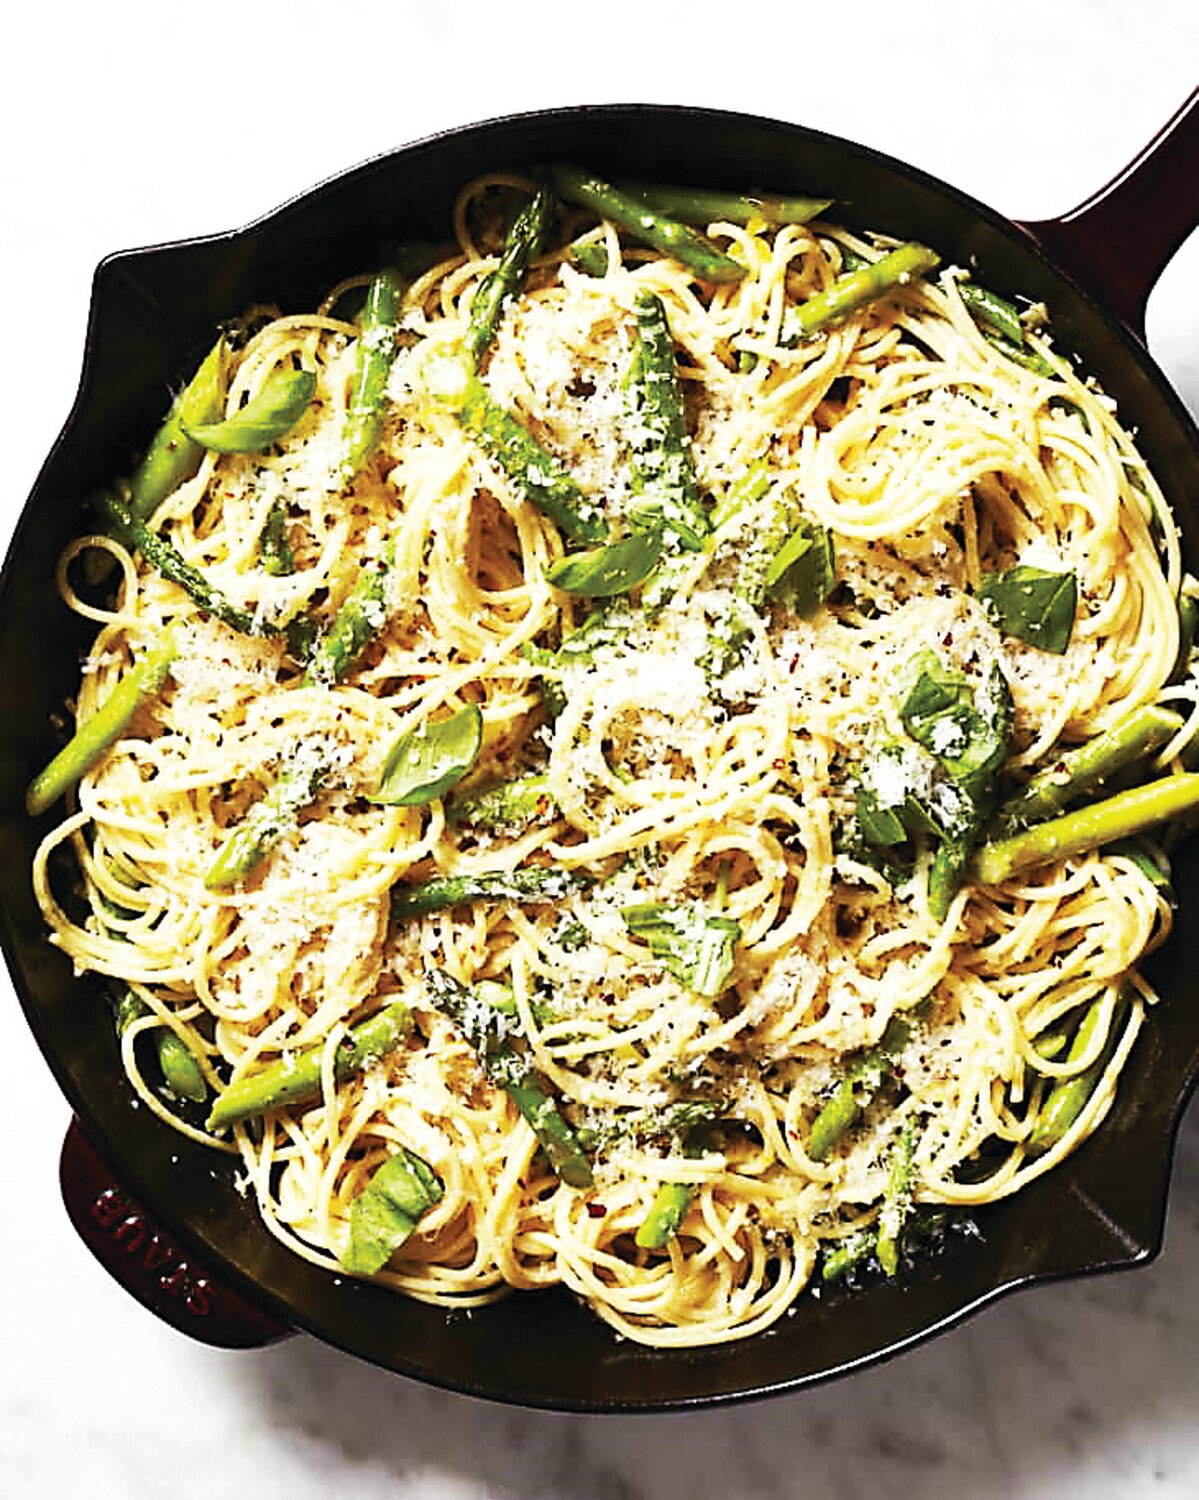 Farm markets are open on Saturdays again, and asparagus is one of the most popular vegetables being harvested this month. This recipe combines pasta, asparagus and lemon for a vegetarian main dish or a side dish.